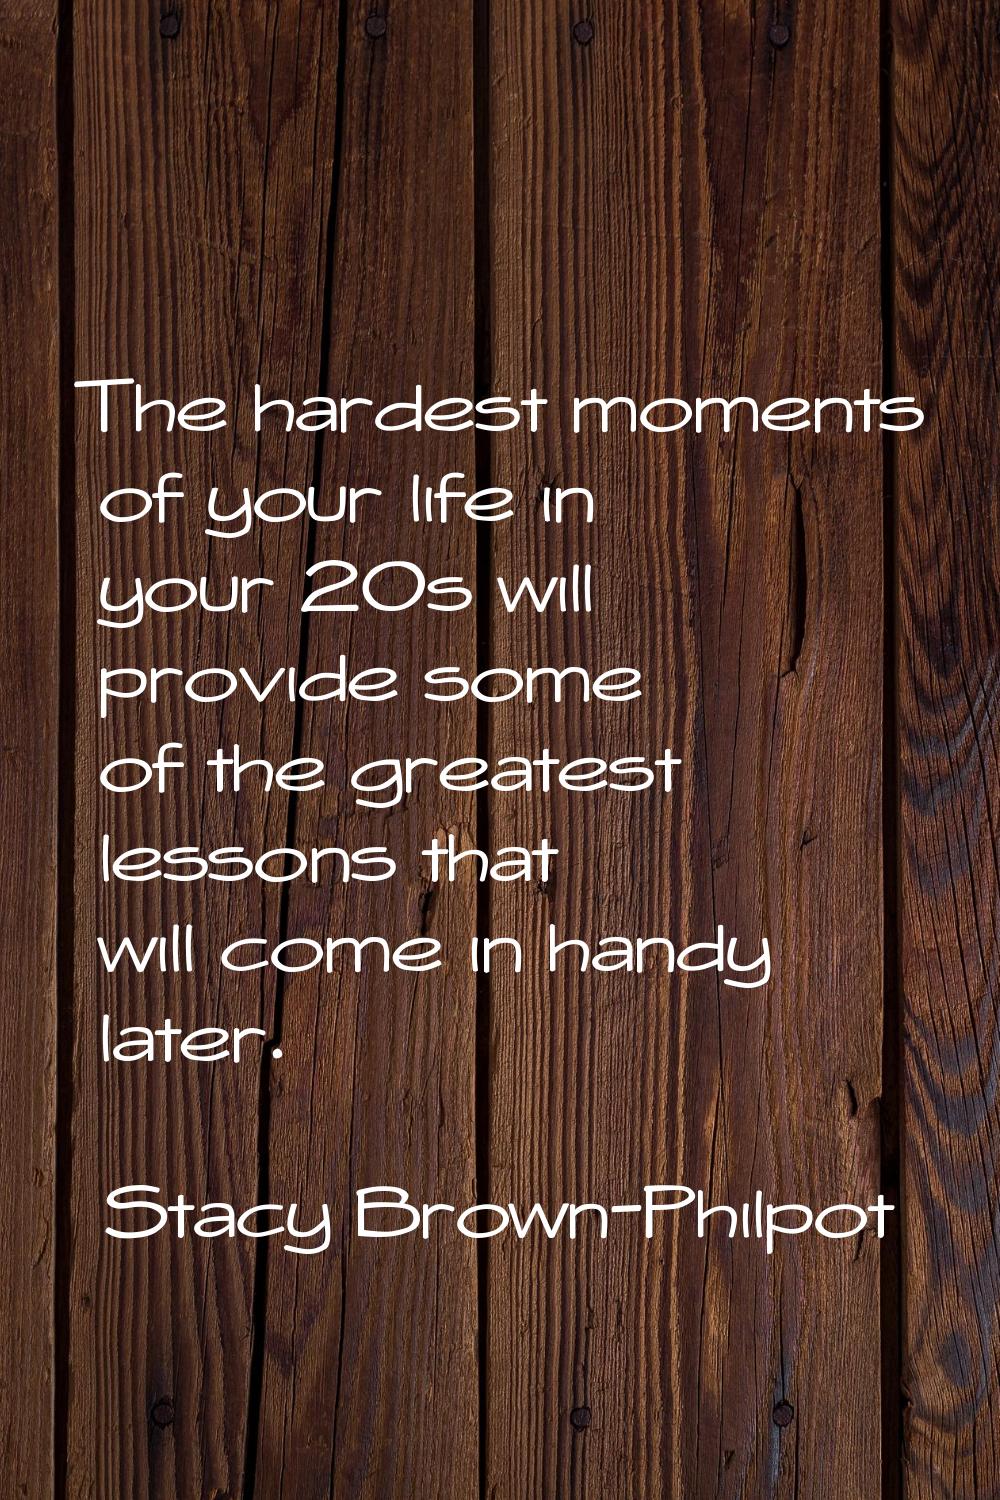 The hardest moments of your life in your 20s will provide some of the greatest lessons that will co